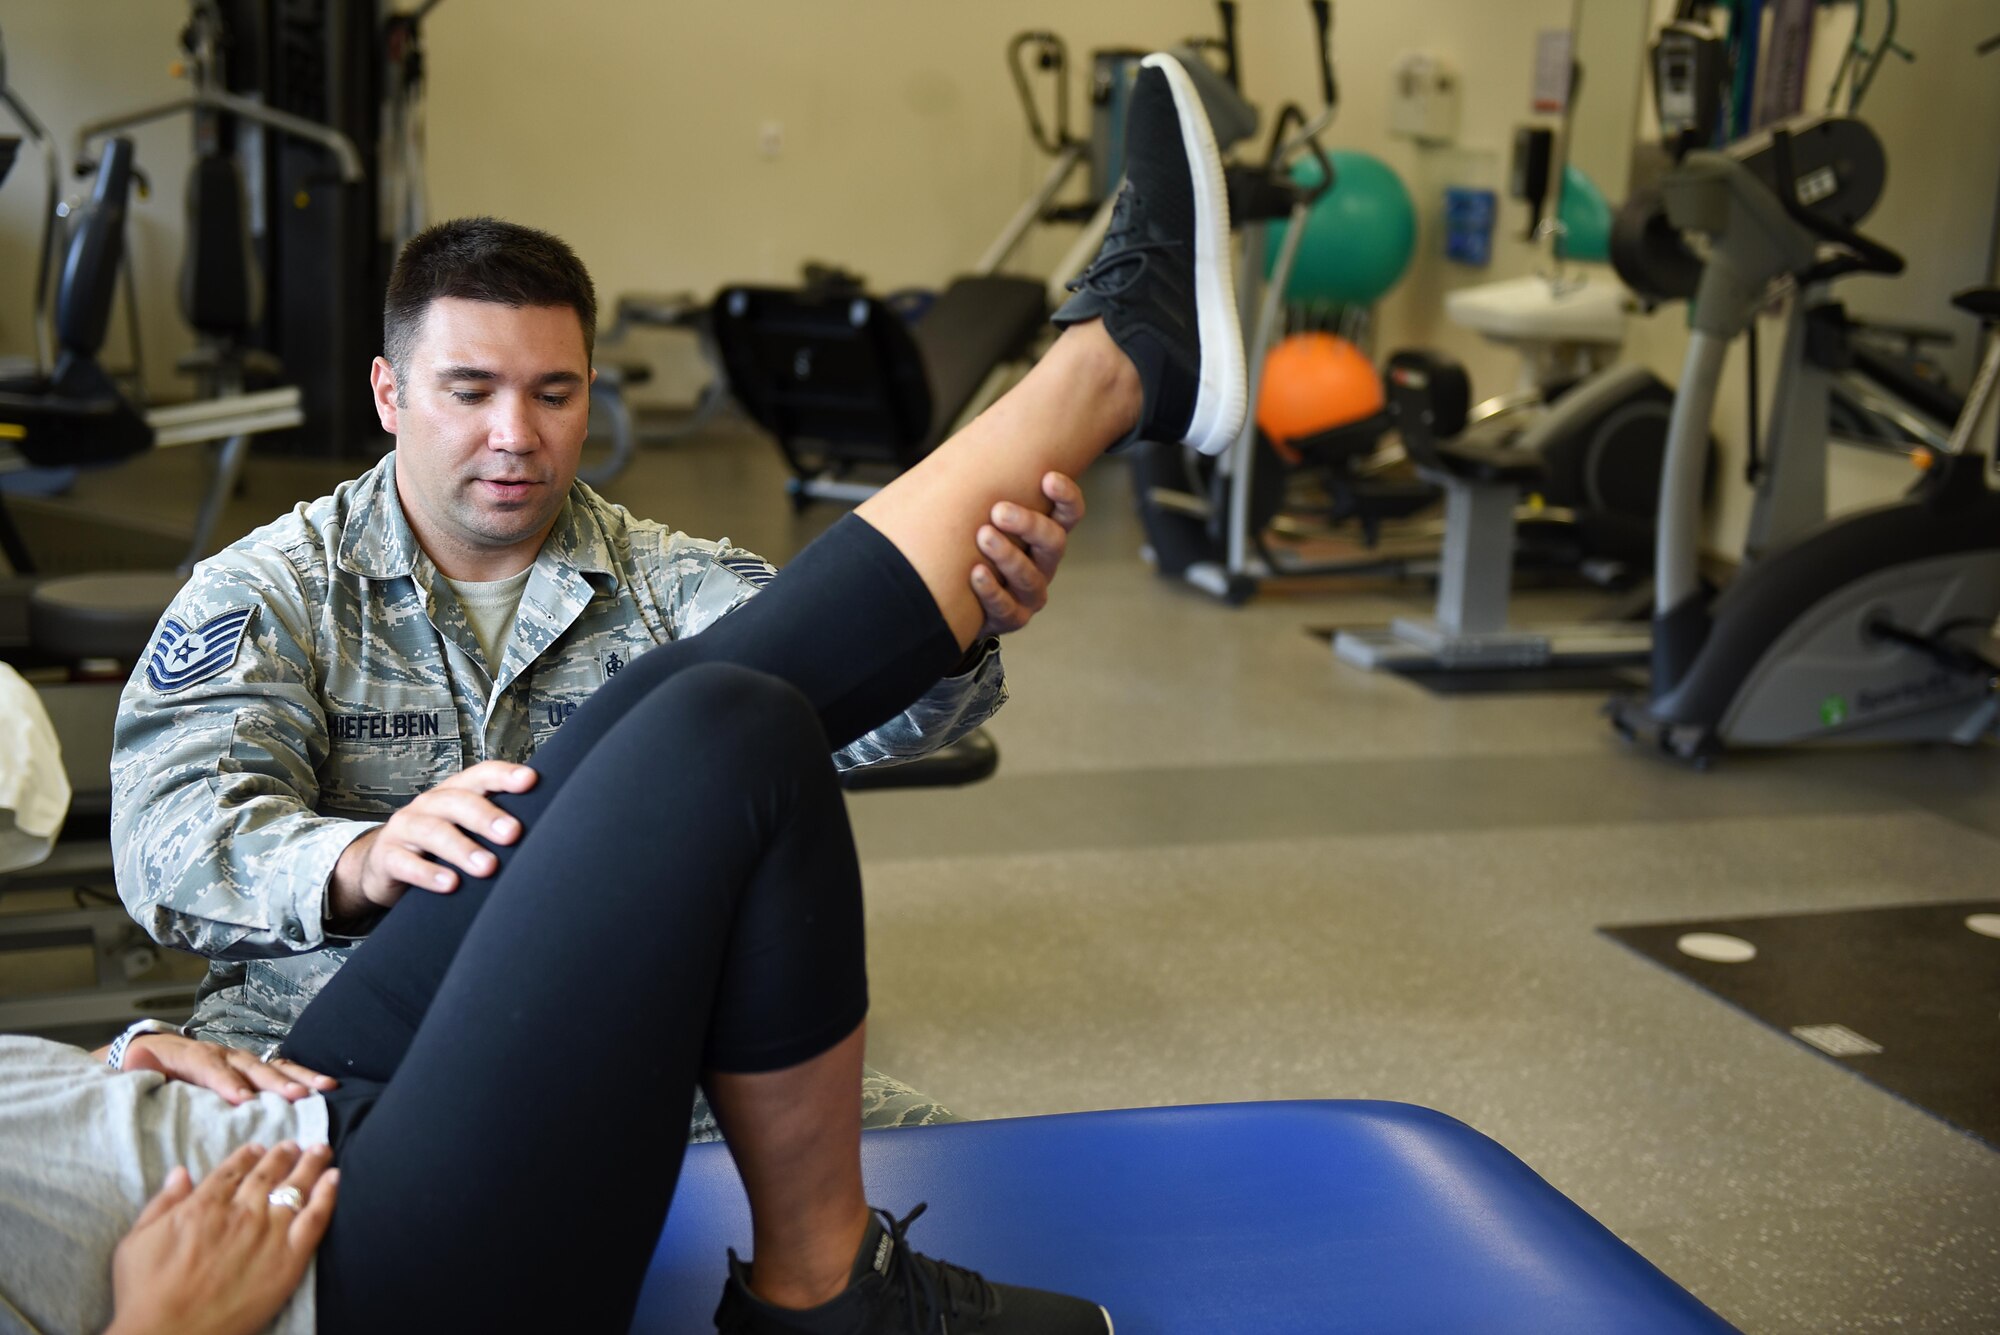 U.S. Air Force Tech. Sgt. Antone Shiefelbein, 14th Medical Operations Squadron clinical medicine flight chief, works with a patient at Columbus Air Force Base, Mississippi, June 11, 2019. The physical therapy team sees more than 2,000 patients annually. (U.S. Air Force photo by Senior Airman Keith Holcomb)